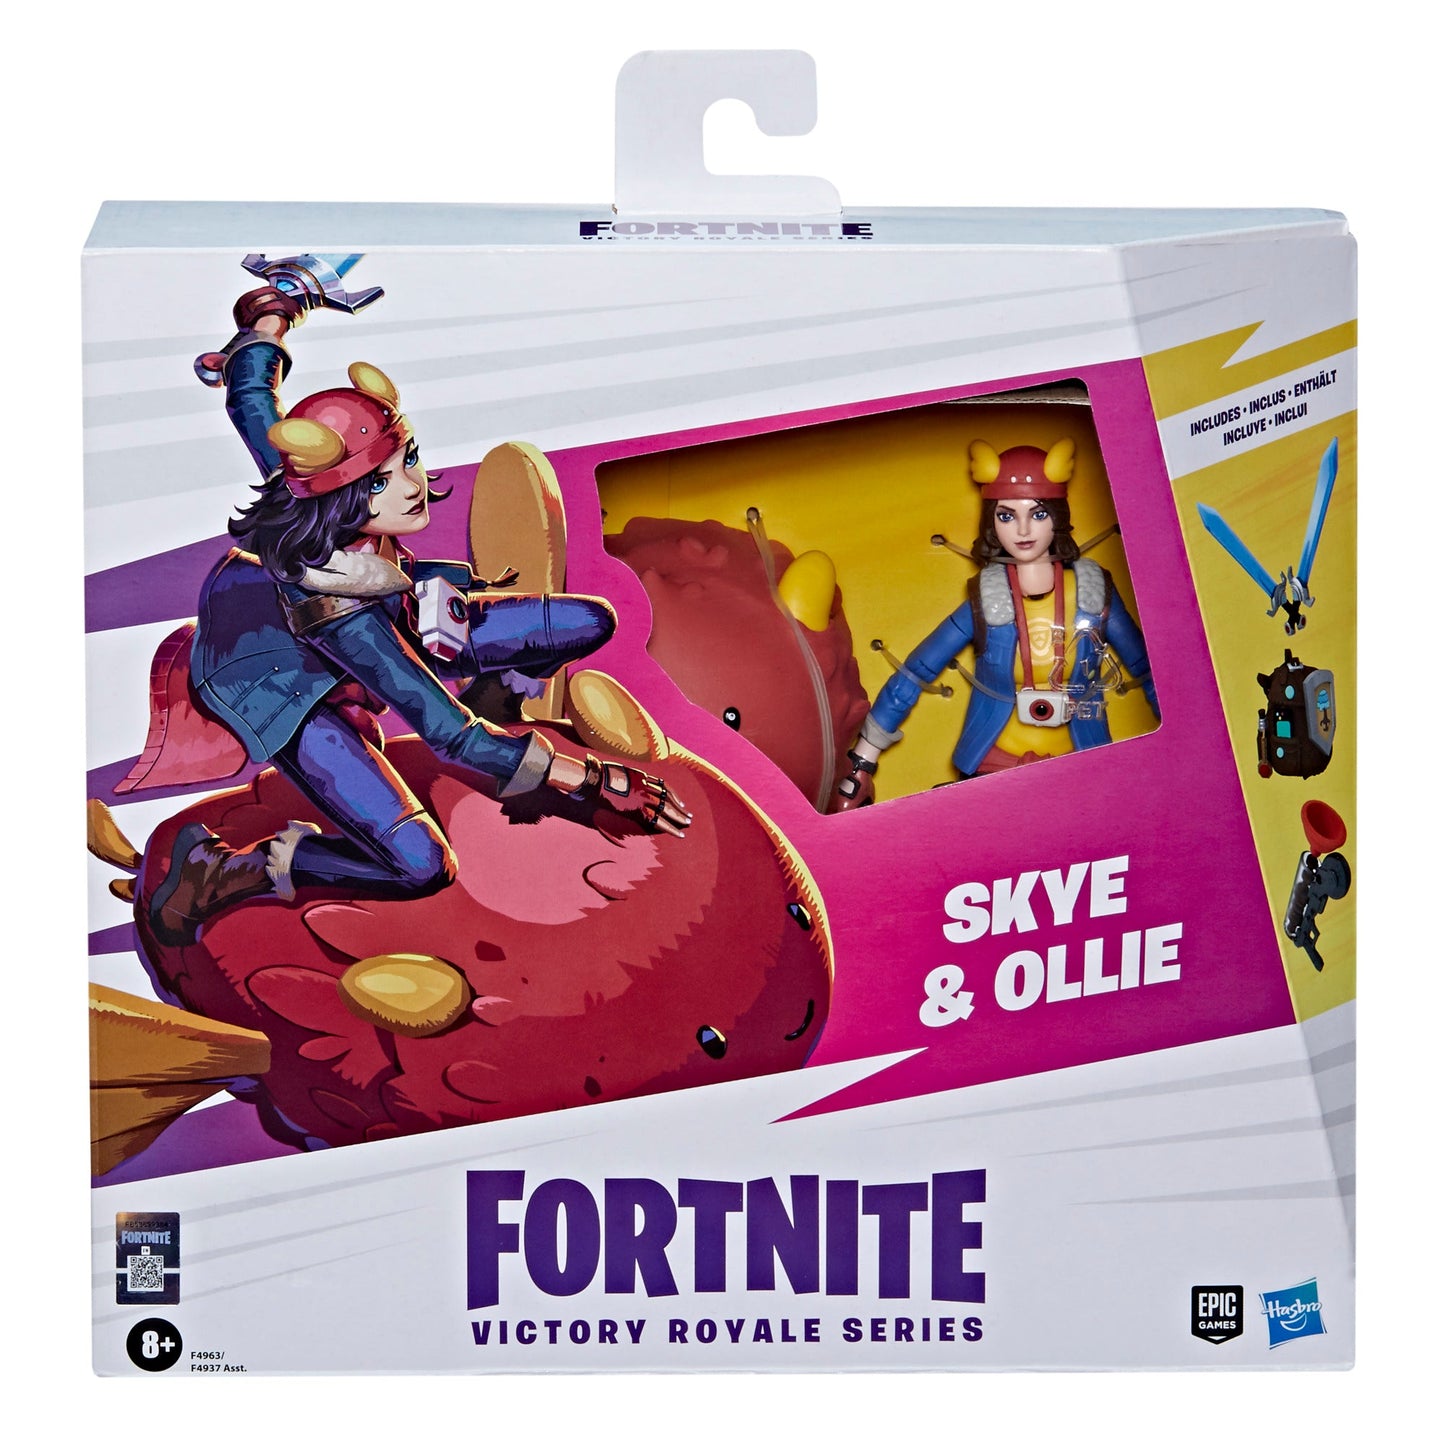 Fortnite Victory Royale Series - (Styles Vary - One Supplied)